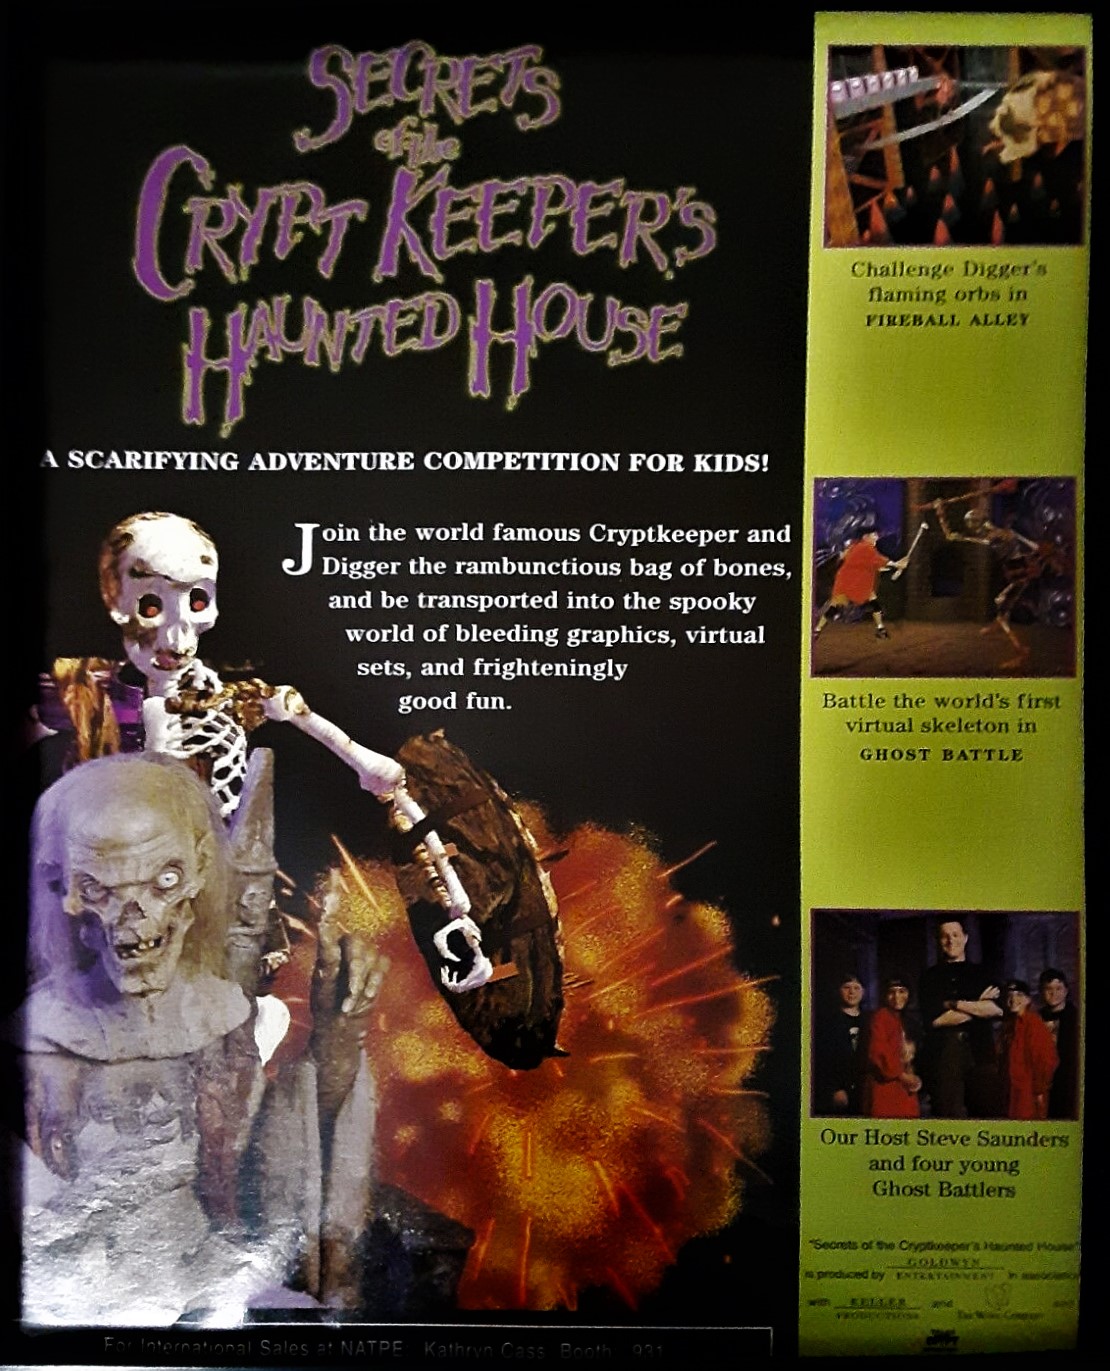 Secrets of the Cryptkeeper's Haunted House